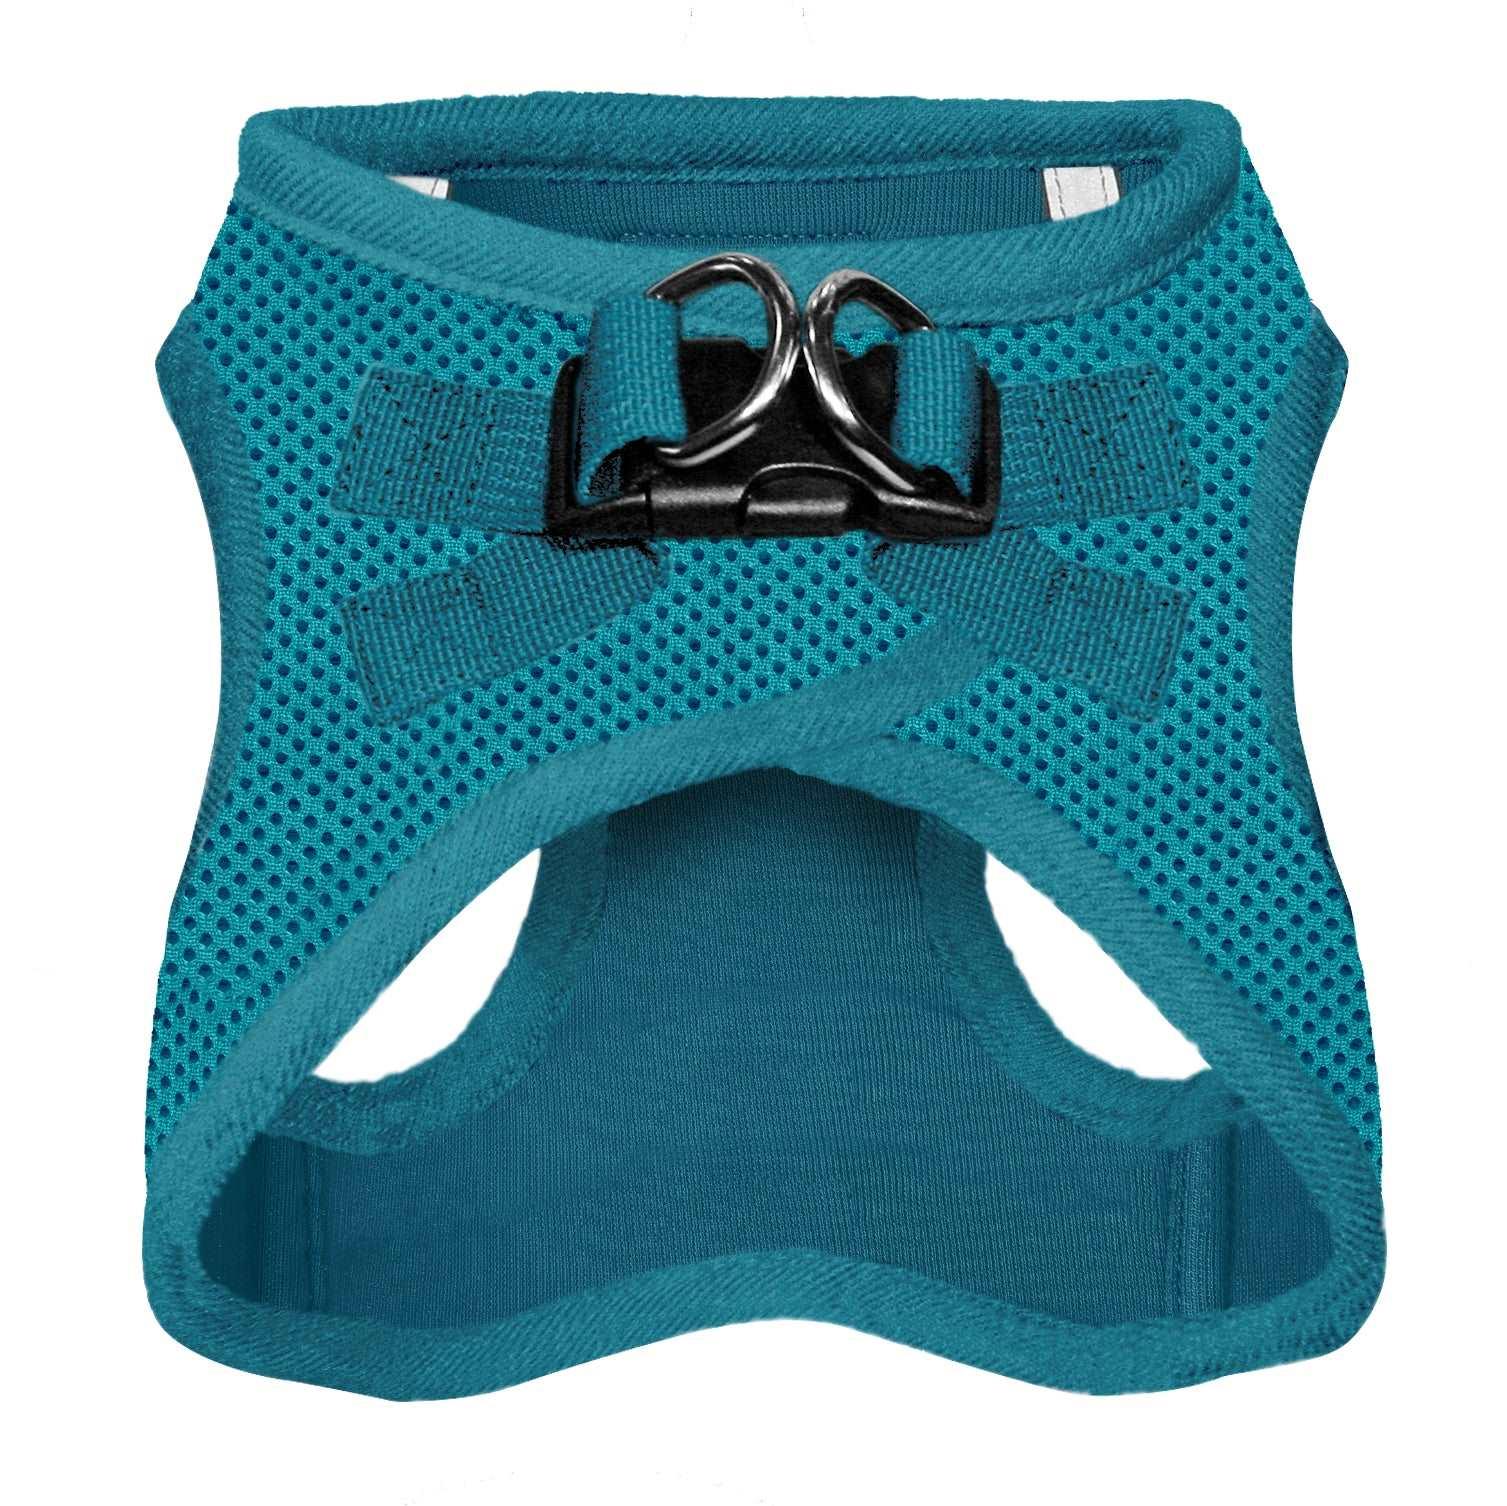 VOYAGER Step-In Air Pet Harness in Turquoise with Matching Trim and Webbing - Black